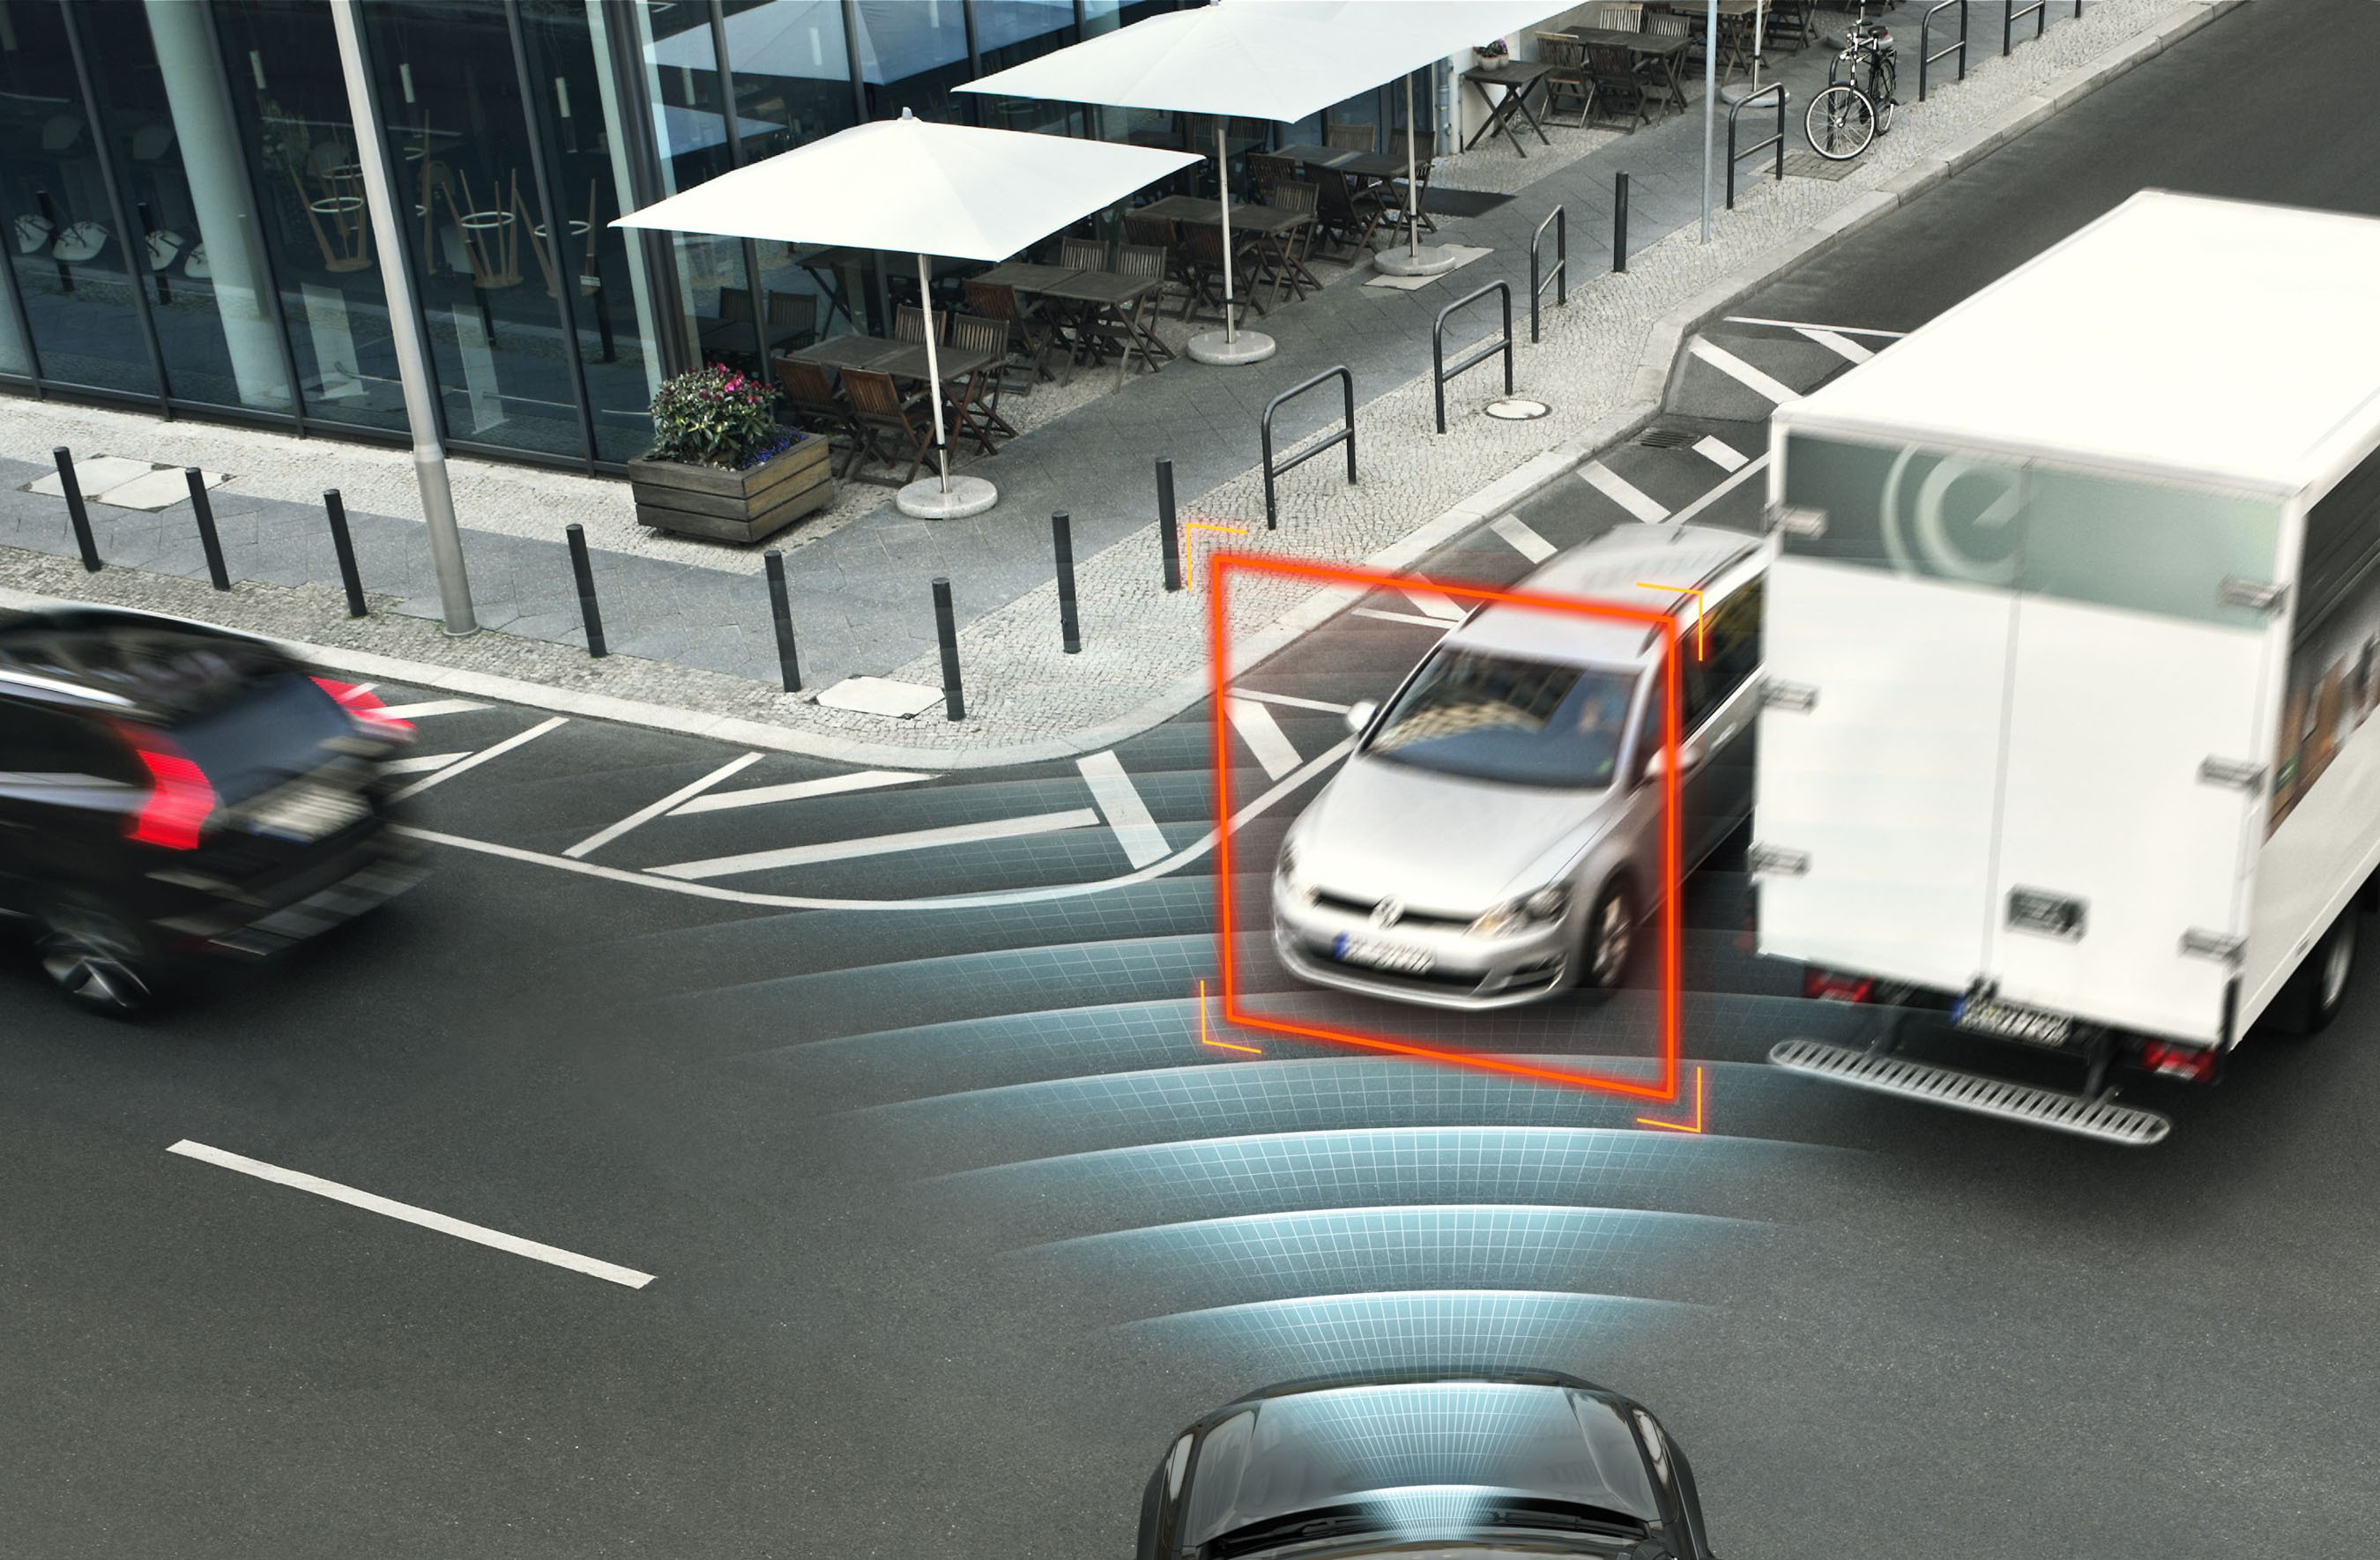 Intersection scenario - XC90 features automatic braking if the driver turns left (or right in left-hand traffic) in front of an oncoming car. The car detects a potential crash and brakes automatically in order to avoid a collision or mitigate the consequences. (PRNewsFoto/Volvo Car Corporation) (PRNewsFoto/VOLVO CAR CORPORATION)